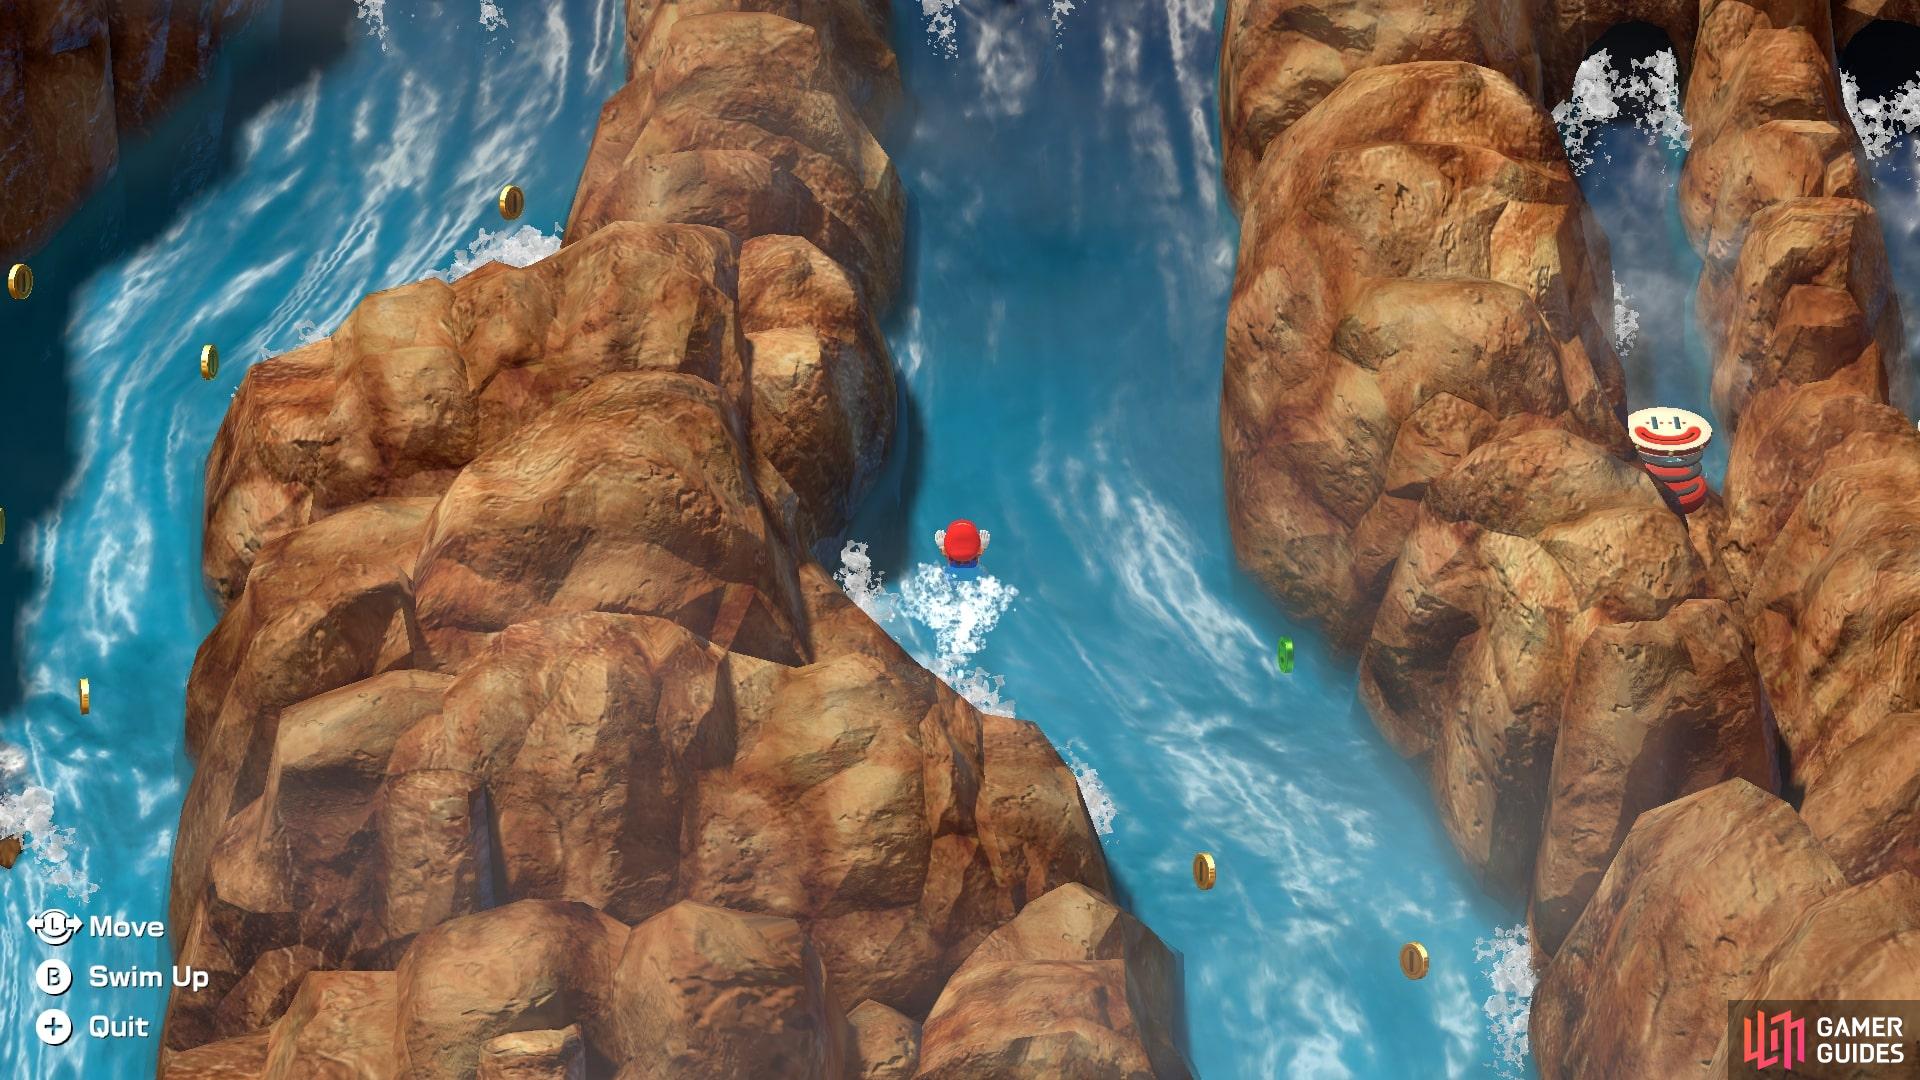 Swim up the waterfall while moving right and left to collect coins.